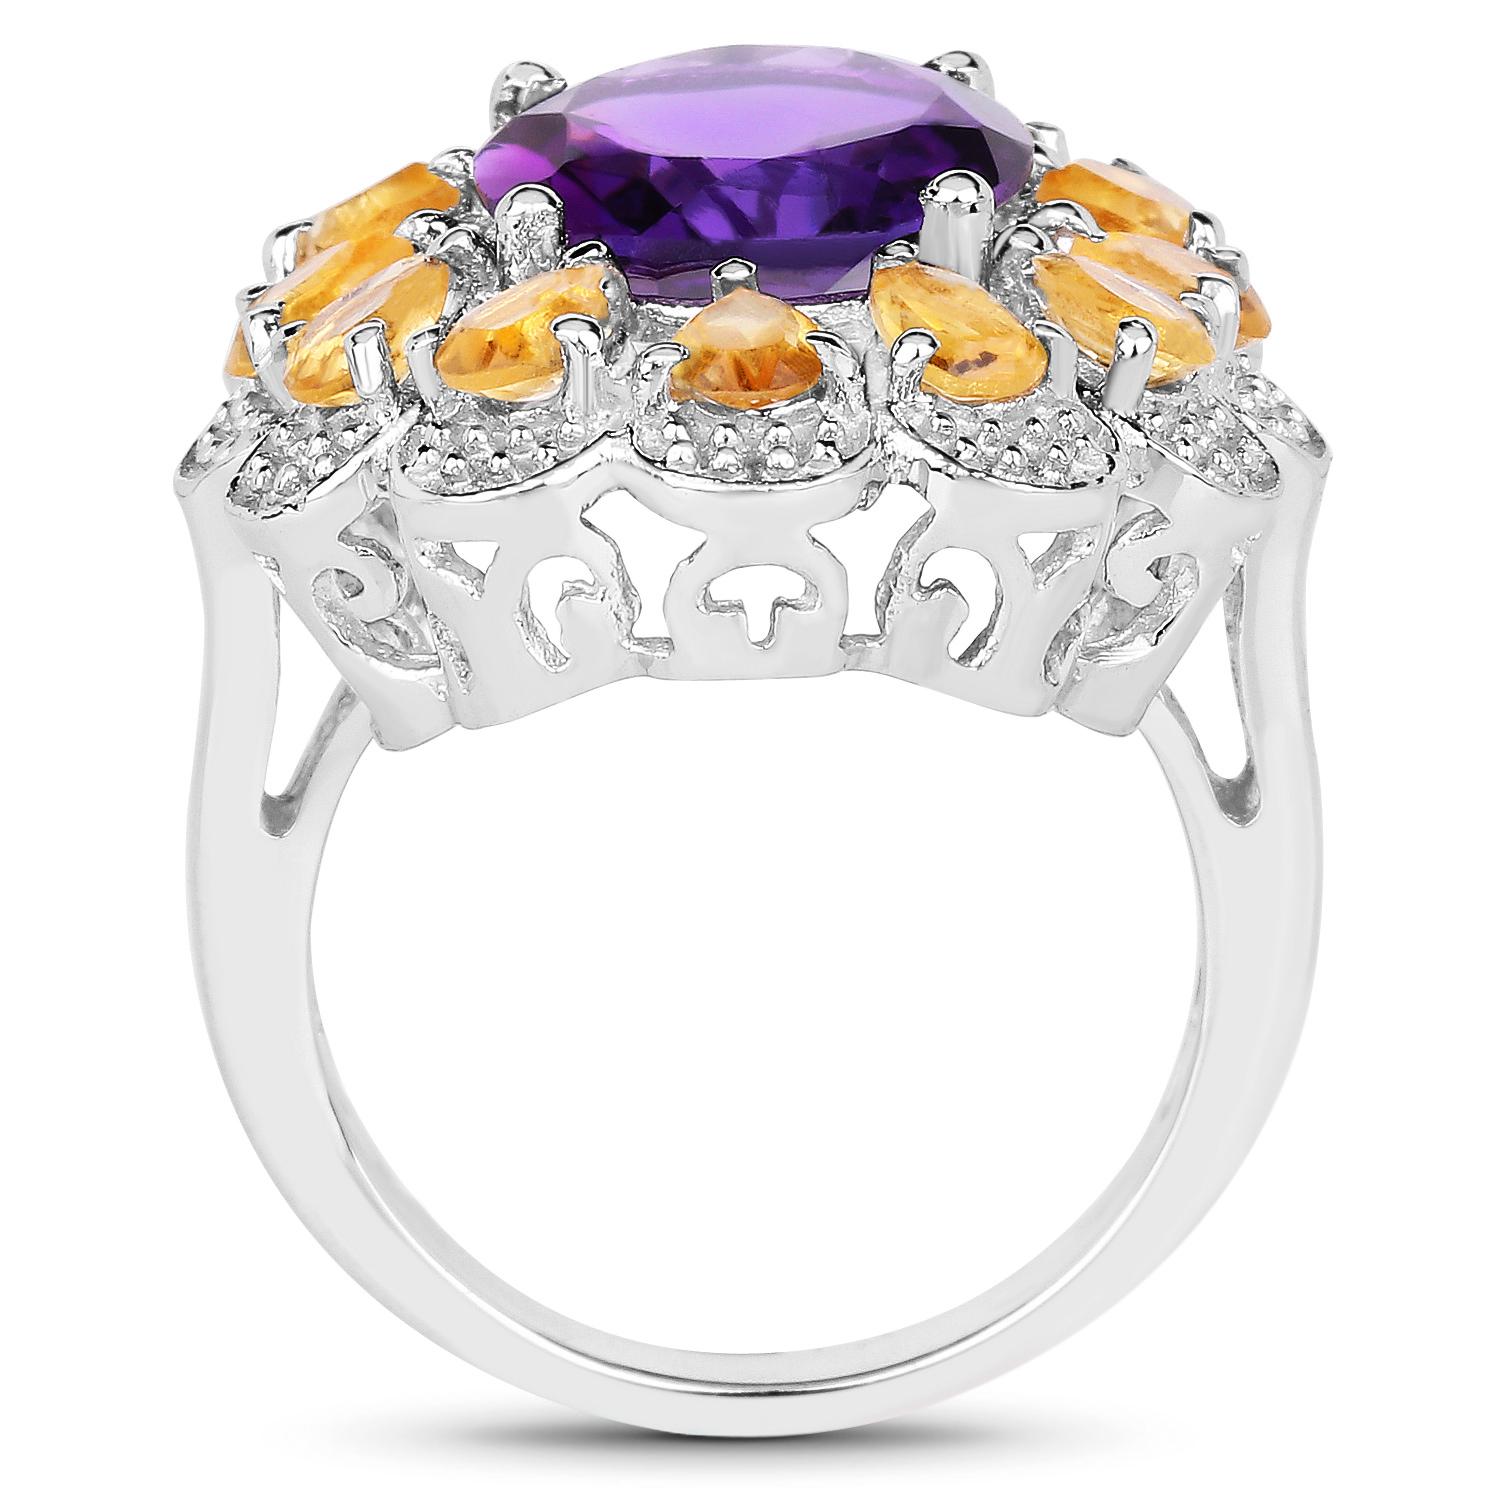 Flower 5.40 Carat Amethyst and Citrine Sterling Silver Cocktail Ring In Excellent Condition For Sale In Laguna Niguel, CA